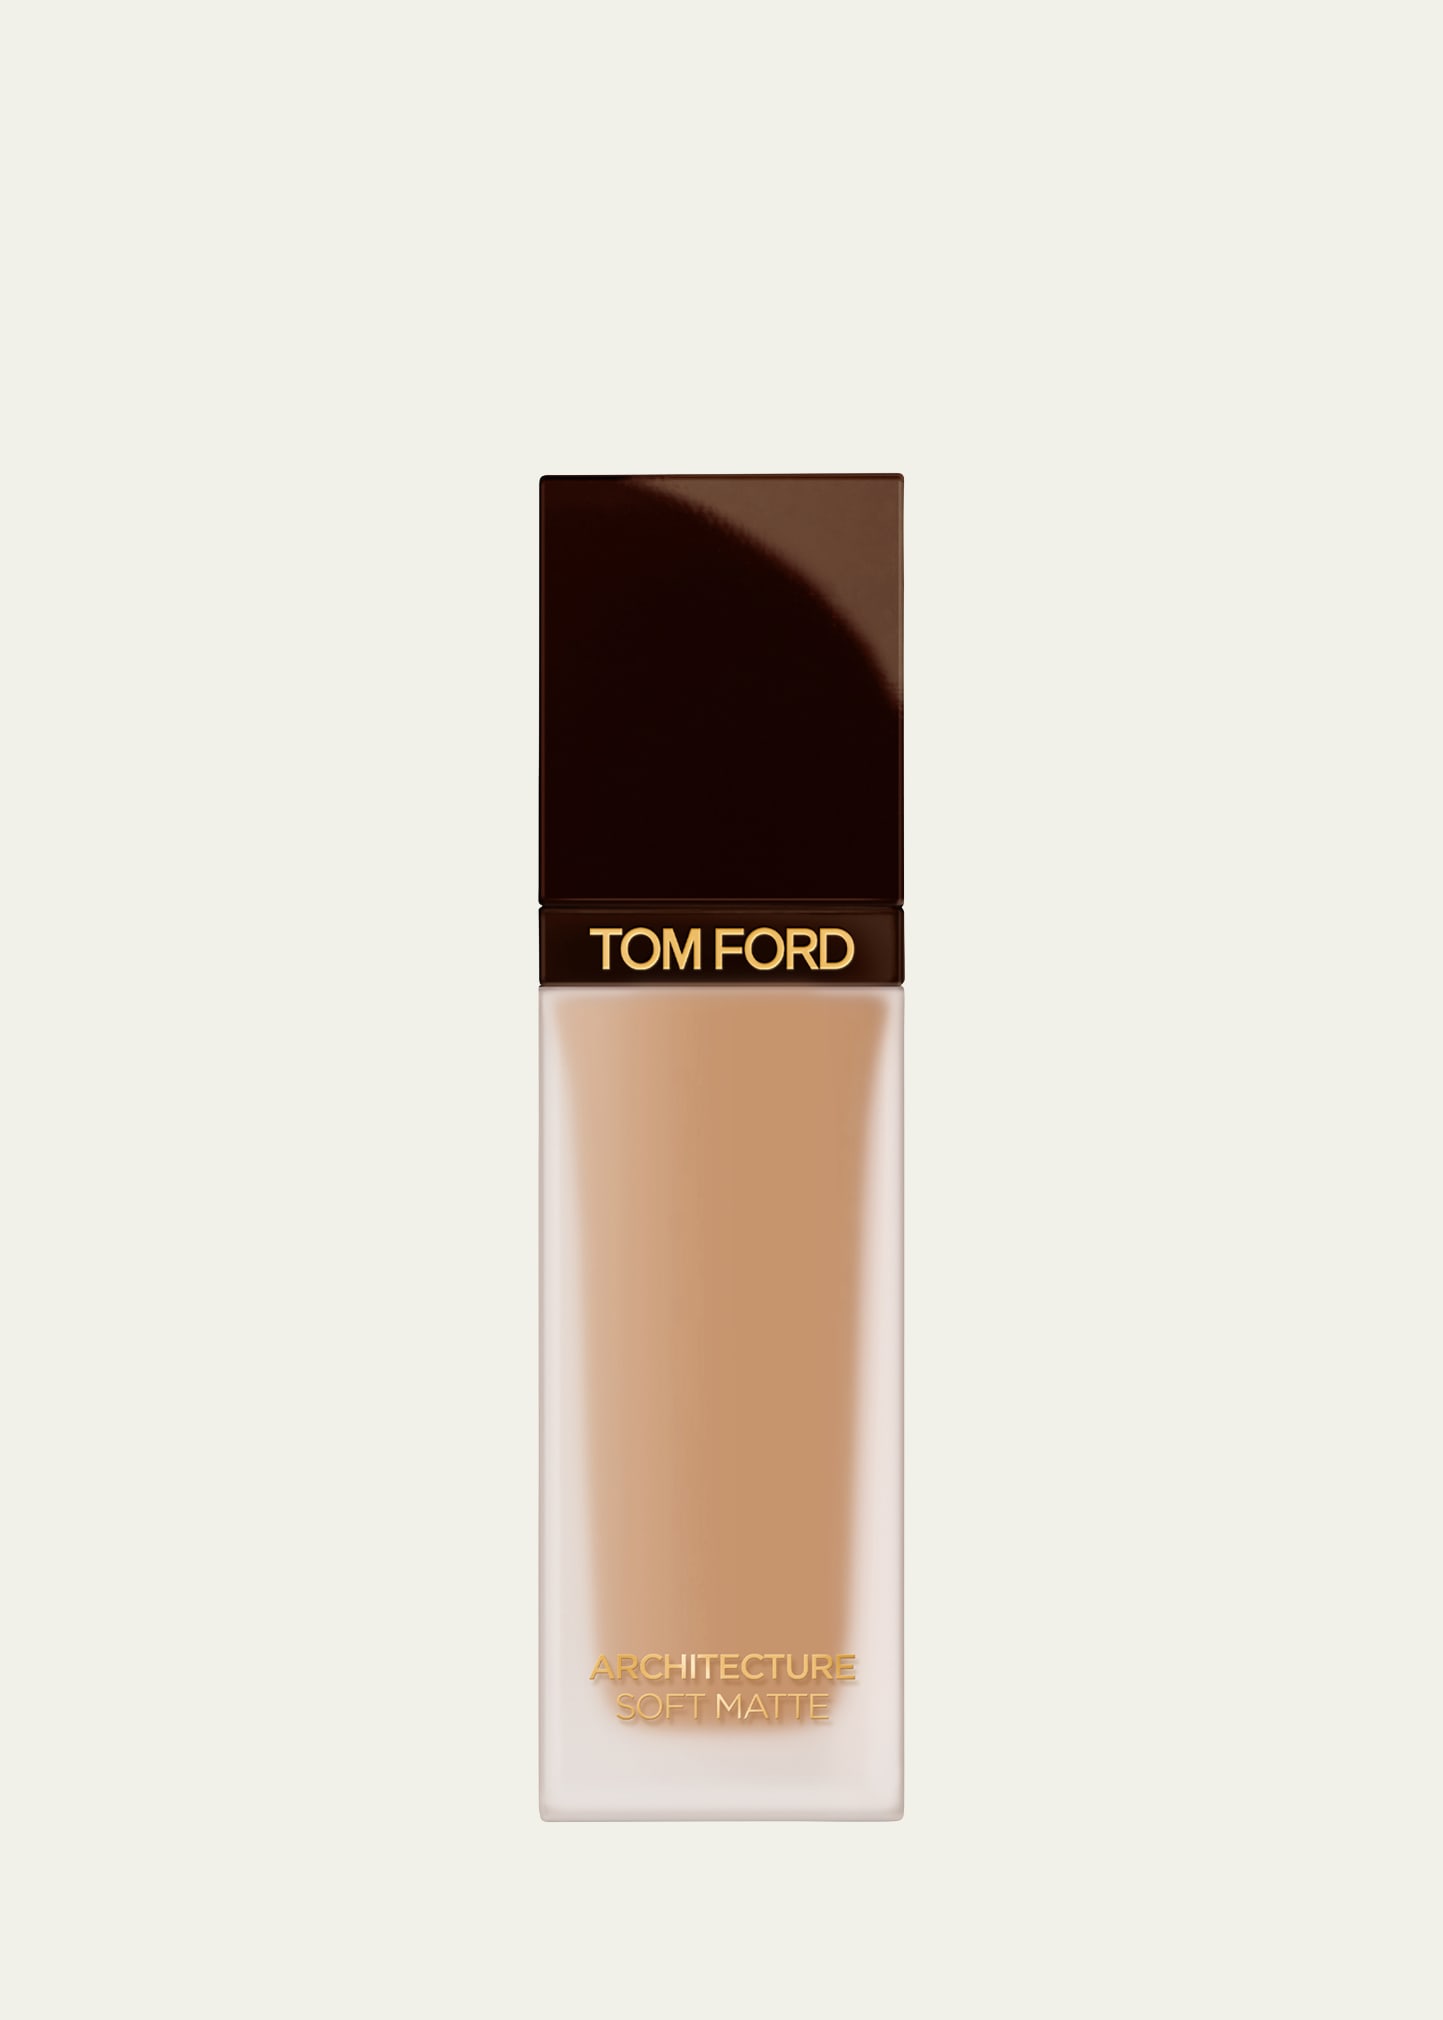 Tom Ford Architecture Soft Matte Foundation In Asm - 7 Tawny